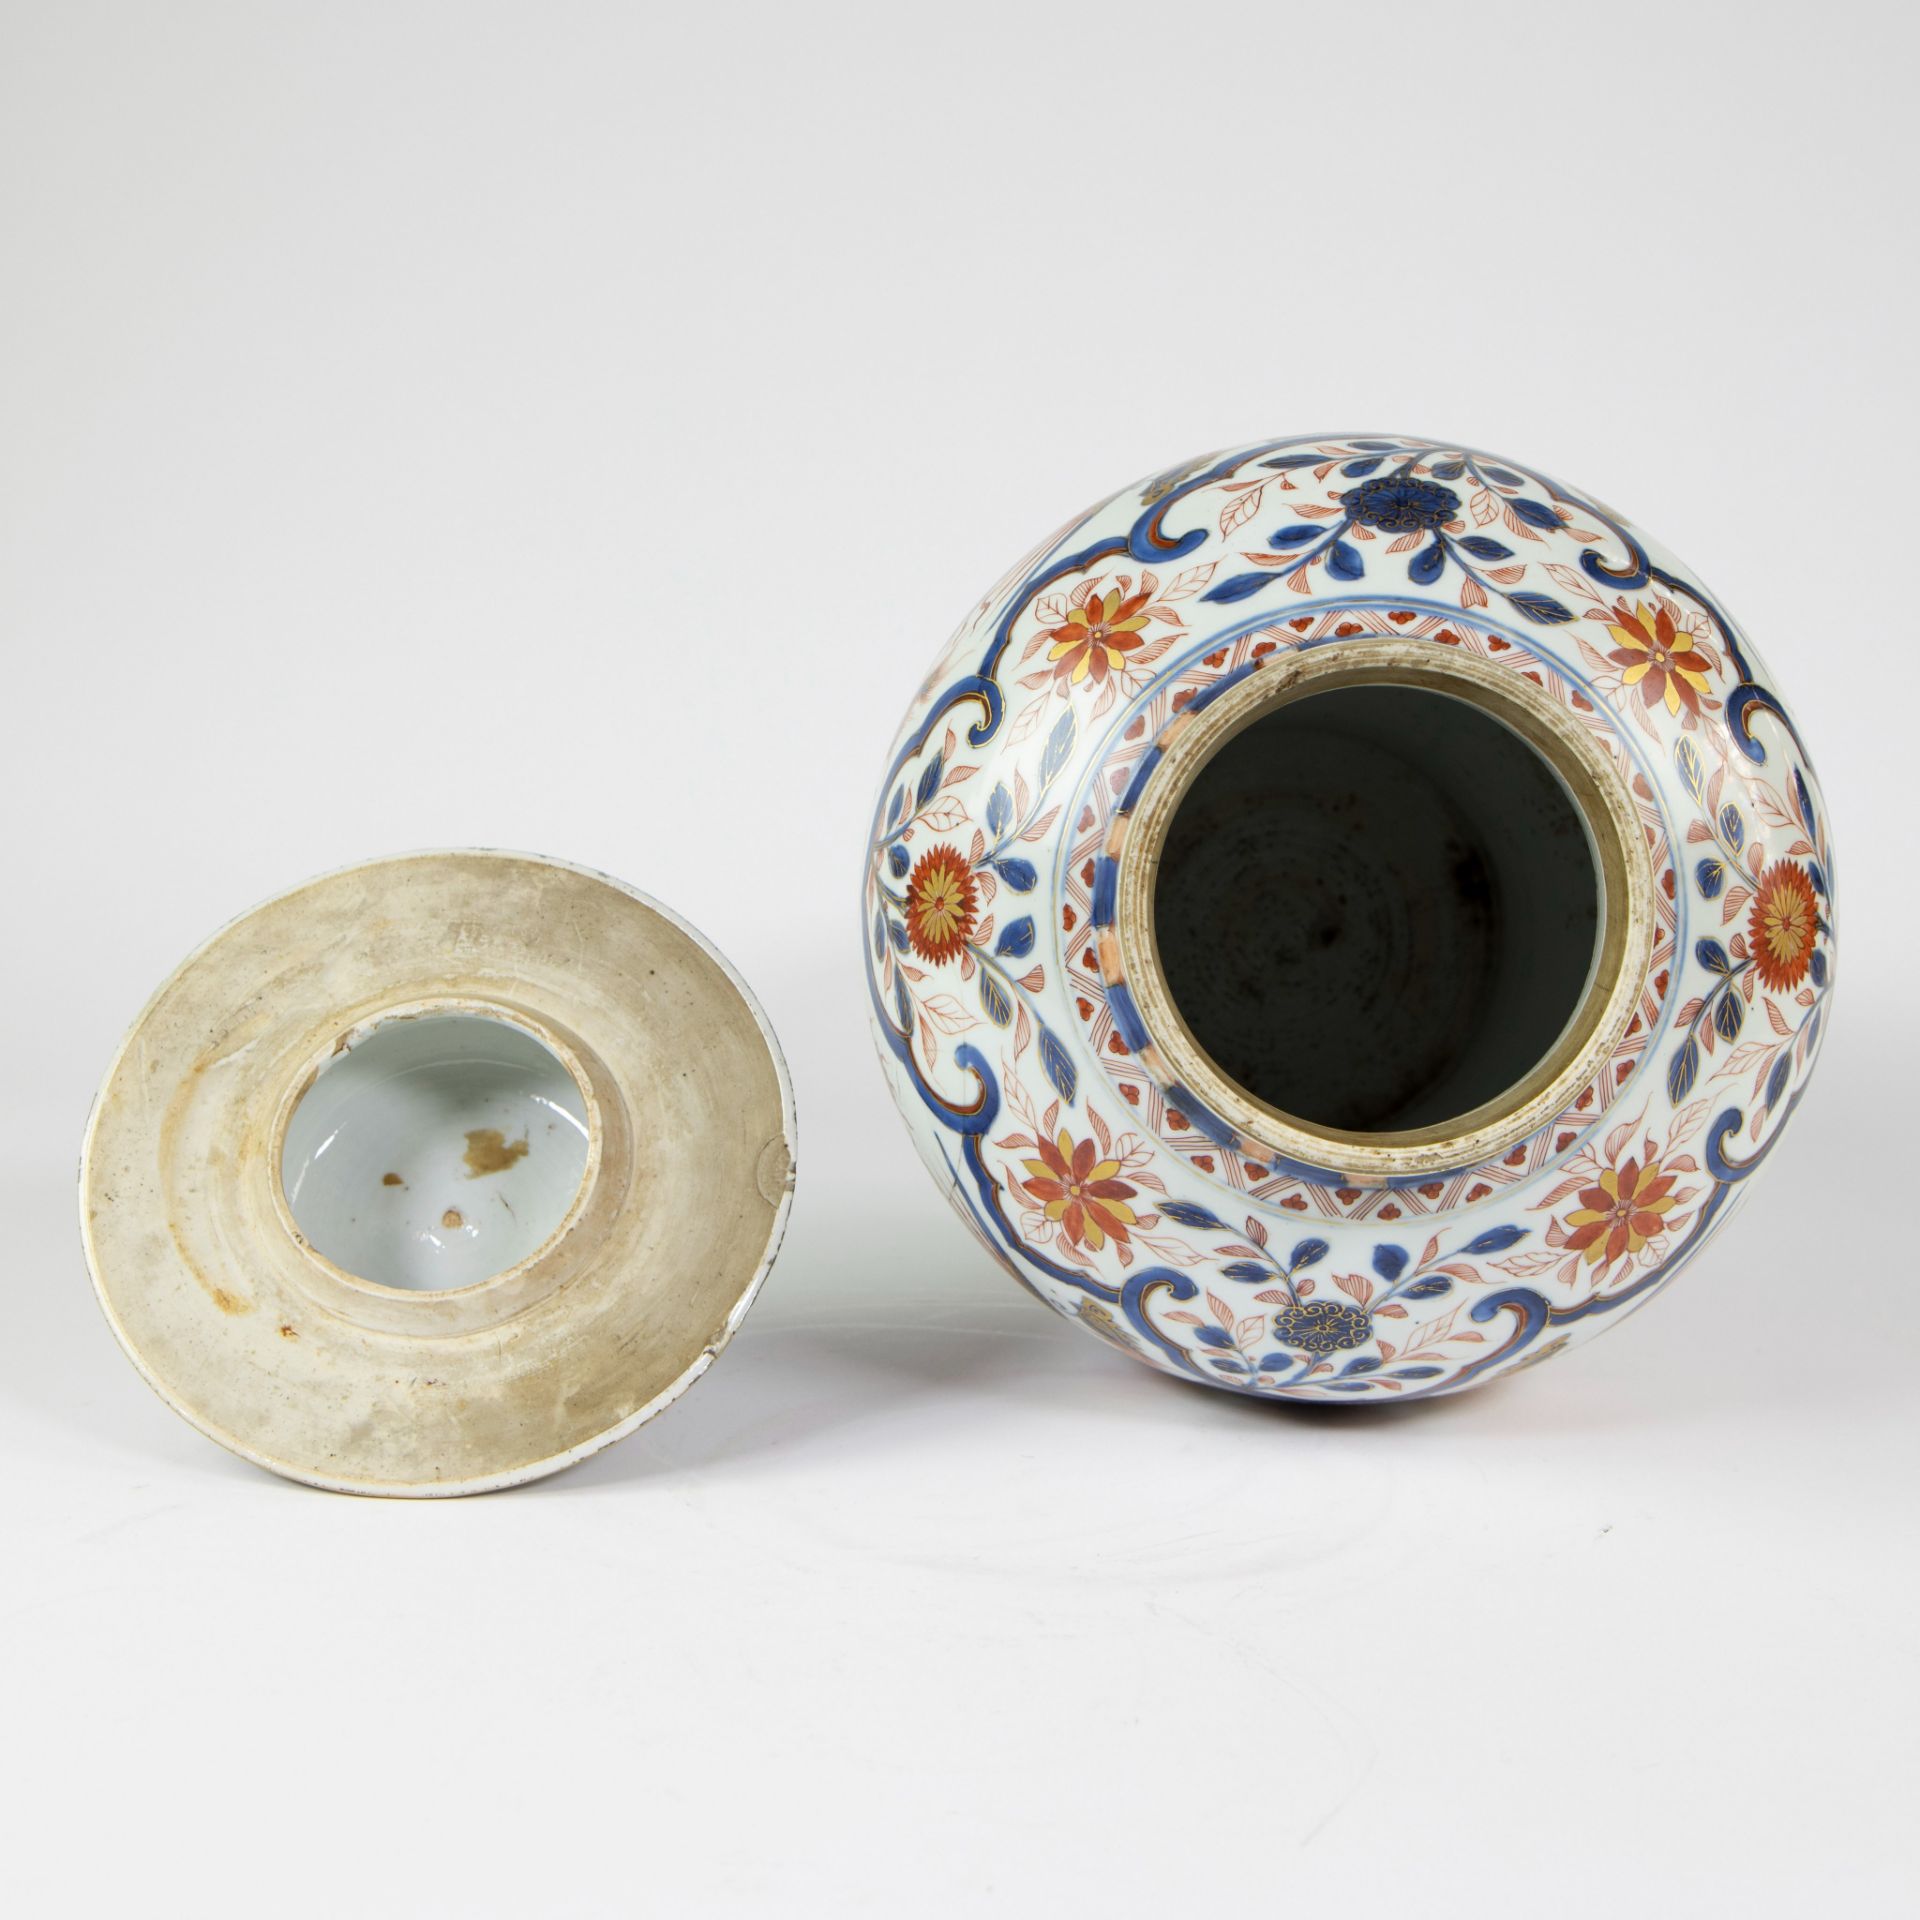 Chinese porcelain jar and its cover, decorated imari enamels, 18th century - Image 11 of 12